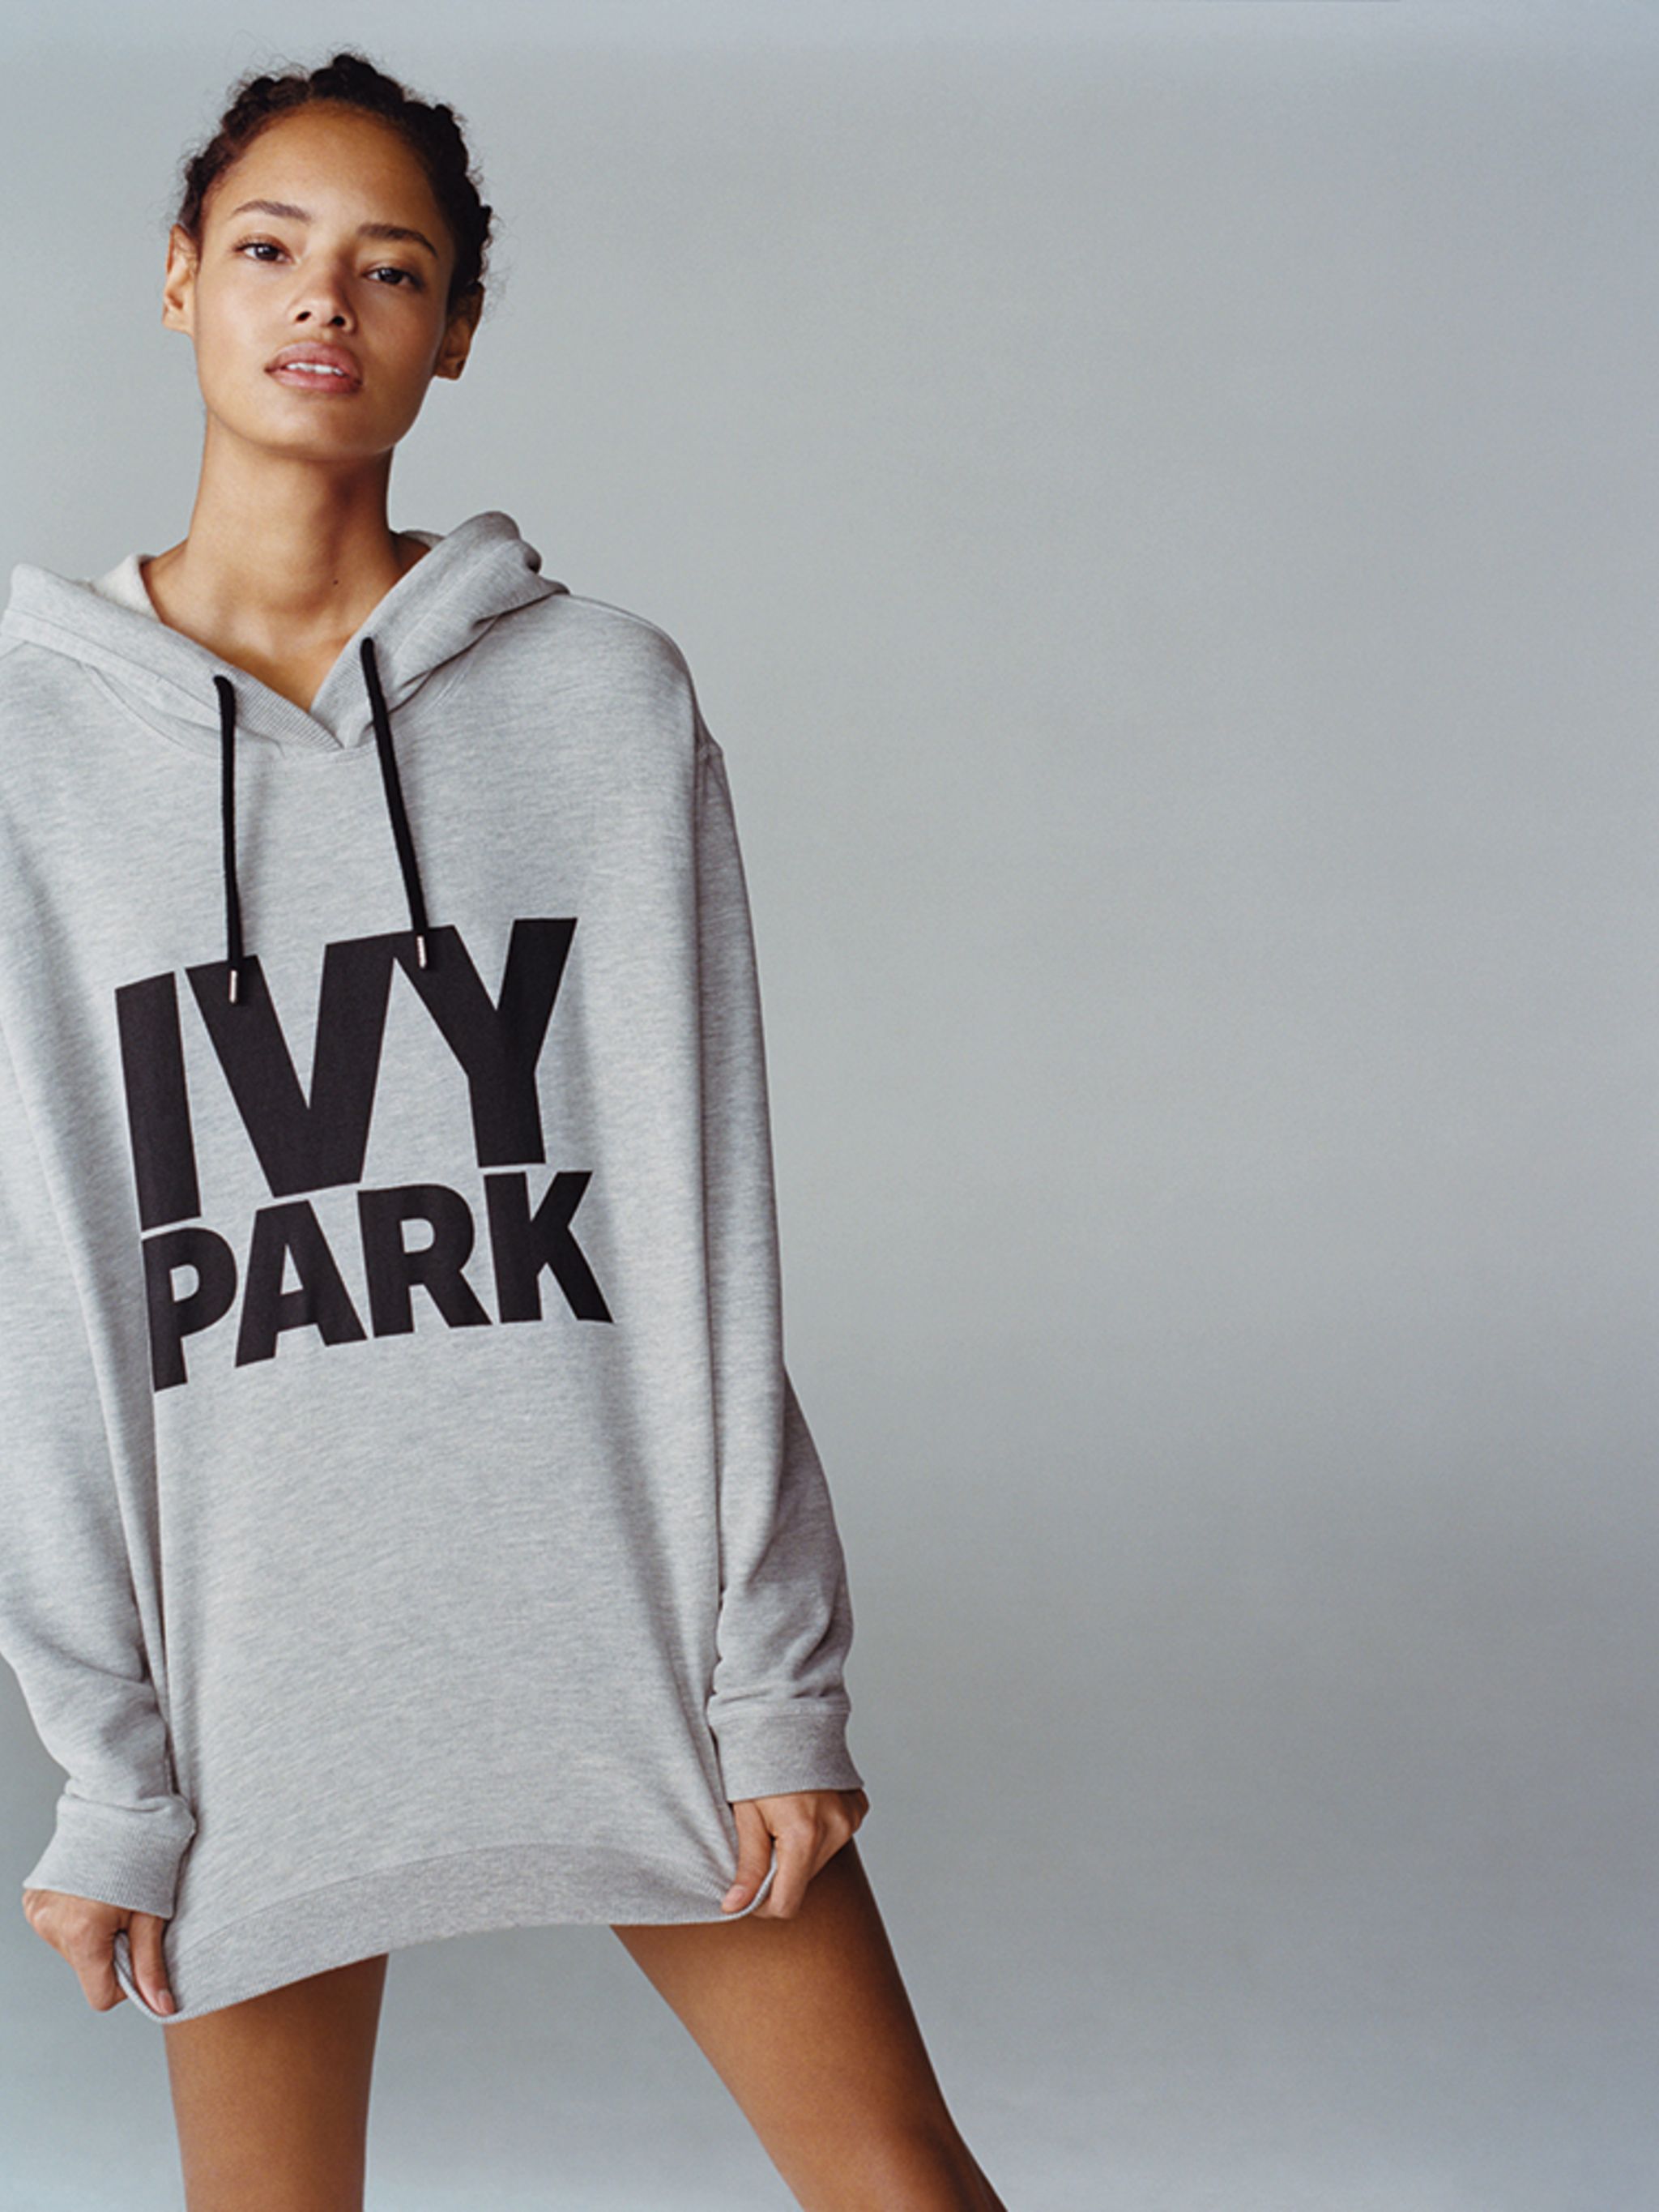 Beyonc├®'s Ivy Park: The Full Collection